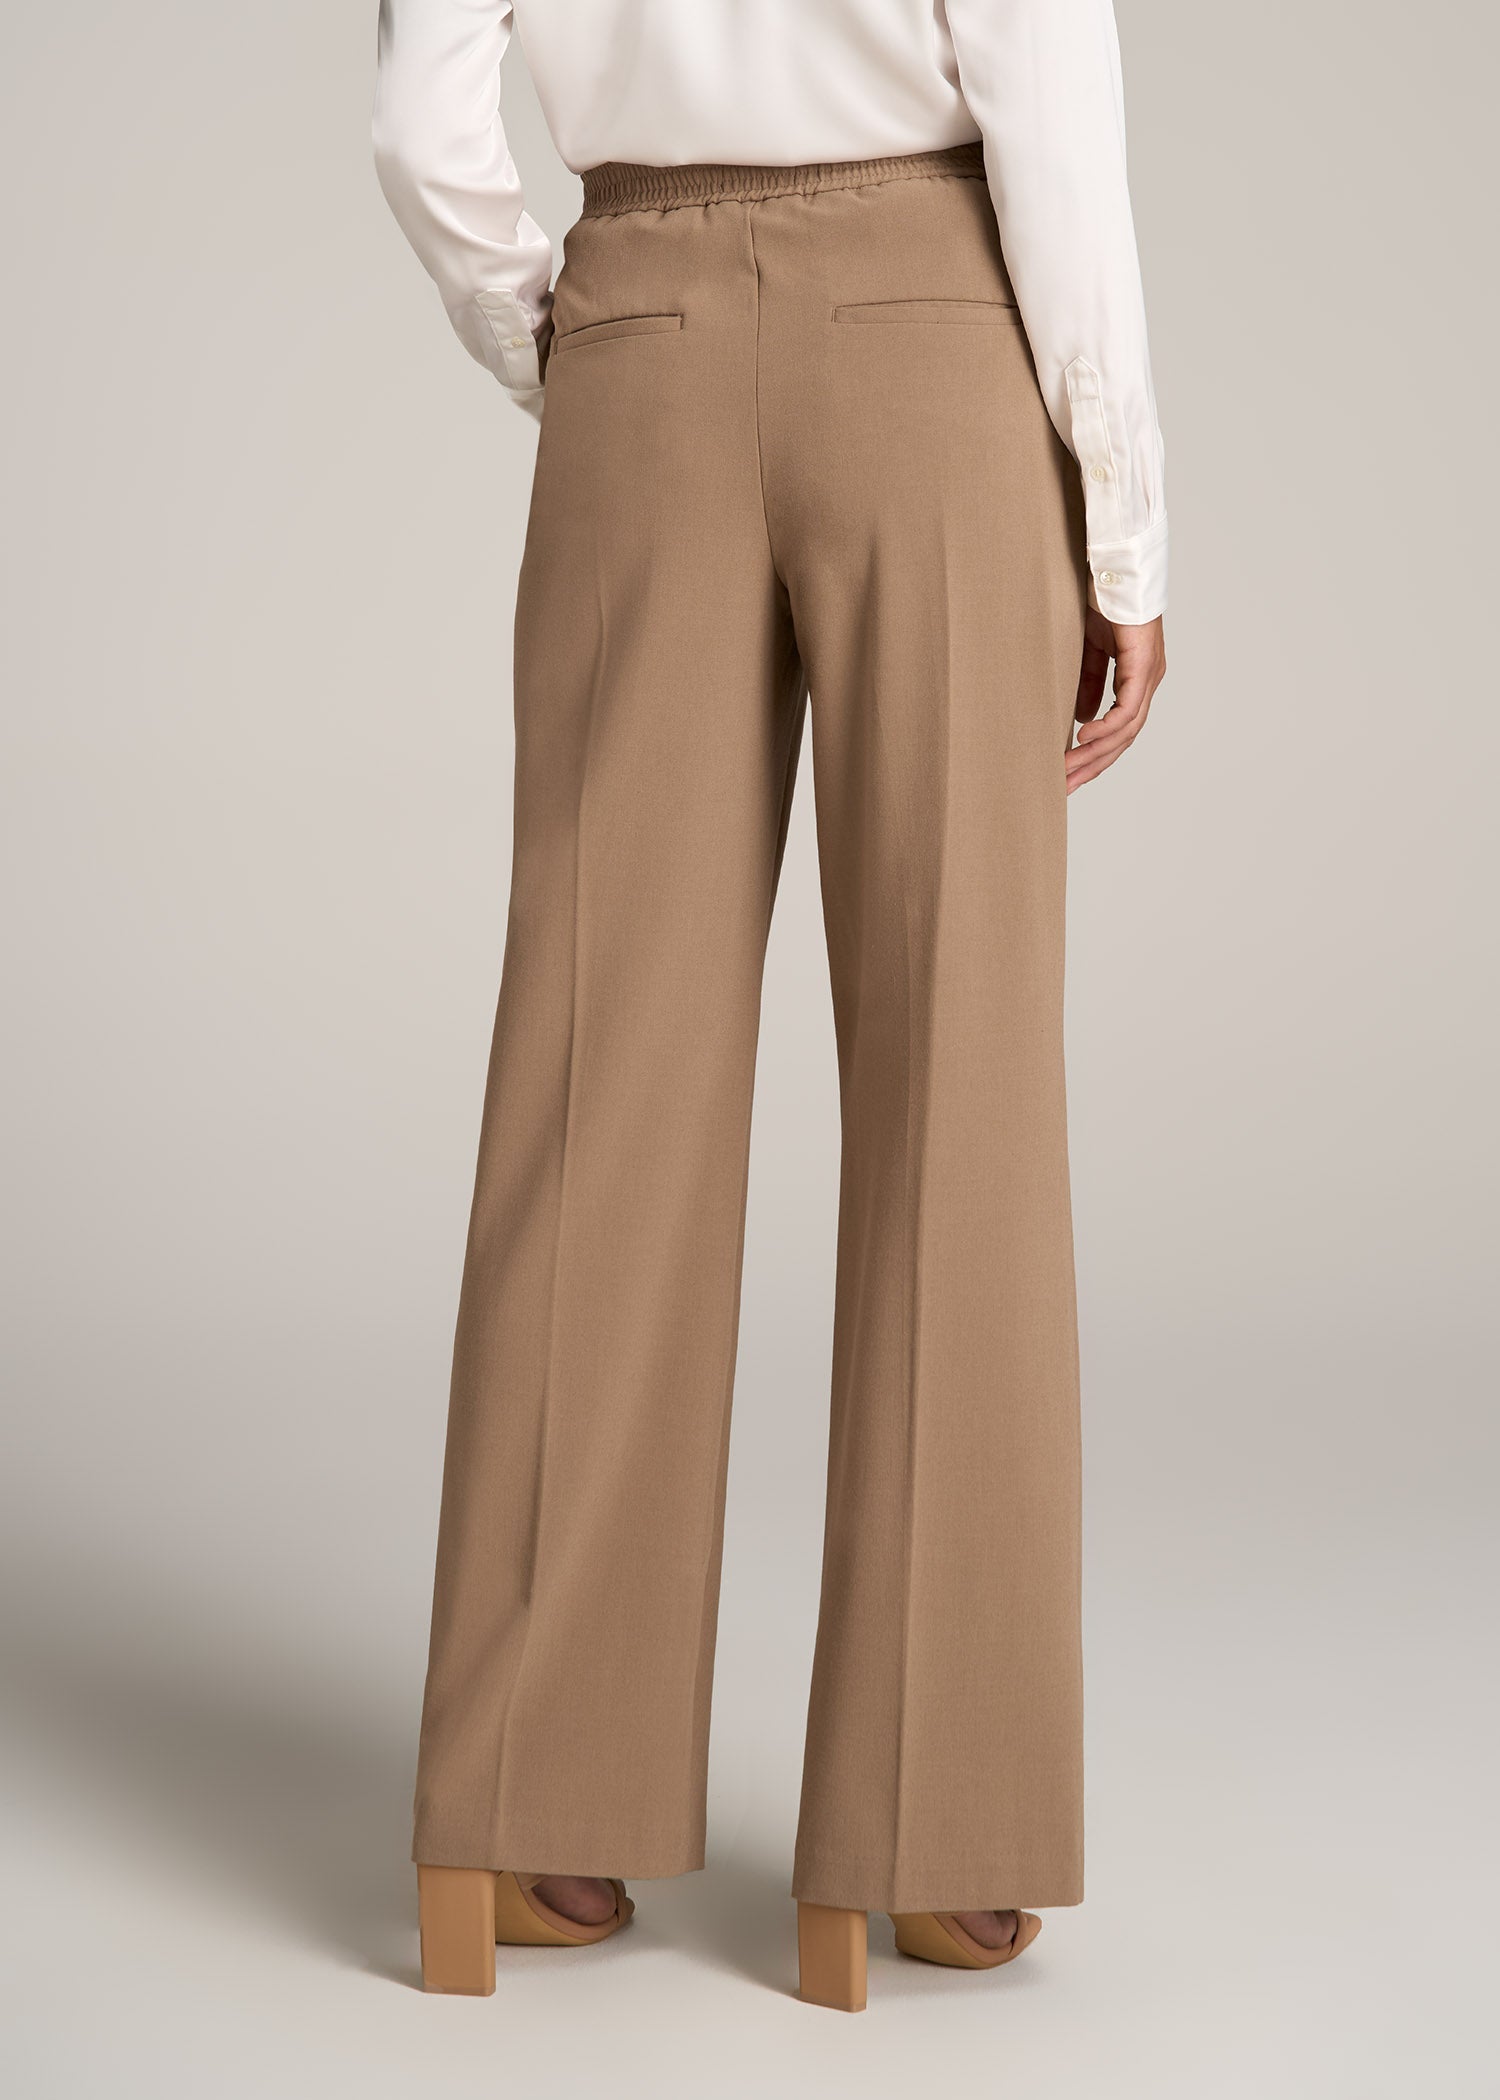 Women's Solid Mid Waisted Wide Leg Pants Straight Casual Baggy Trousers  Beige S - Walmart.com